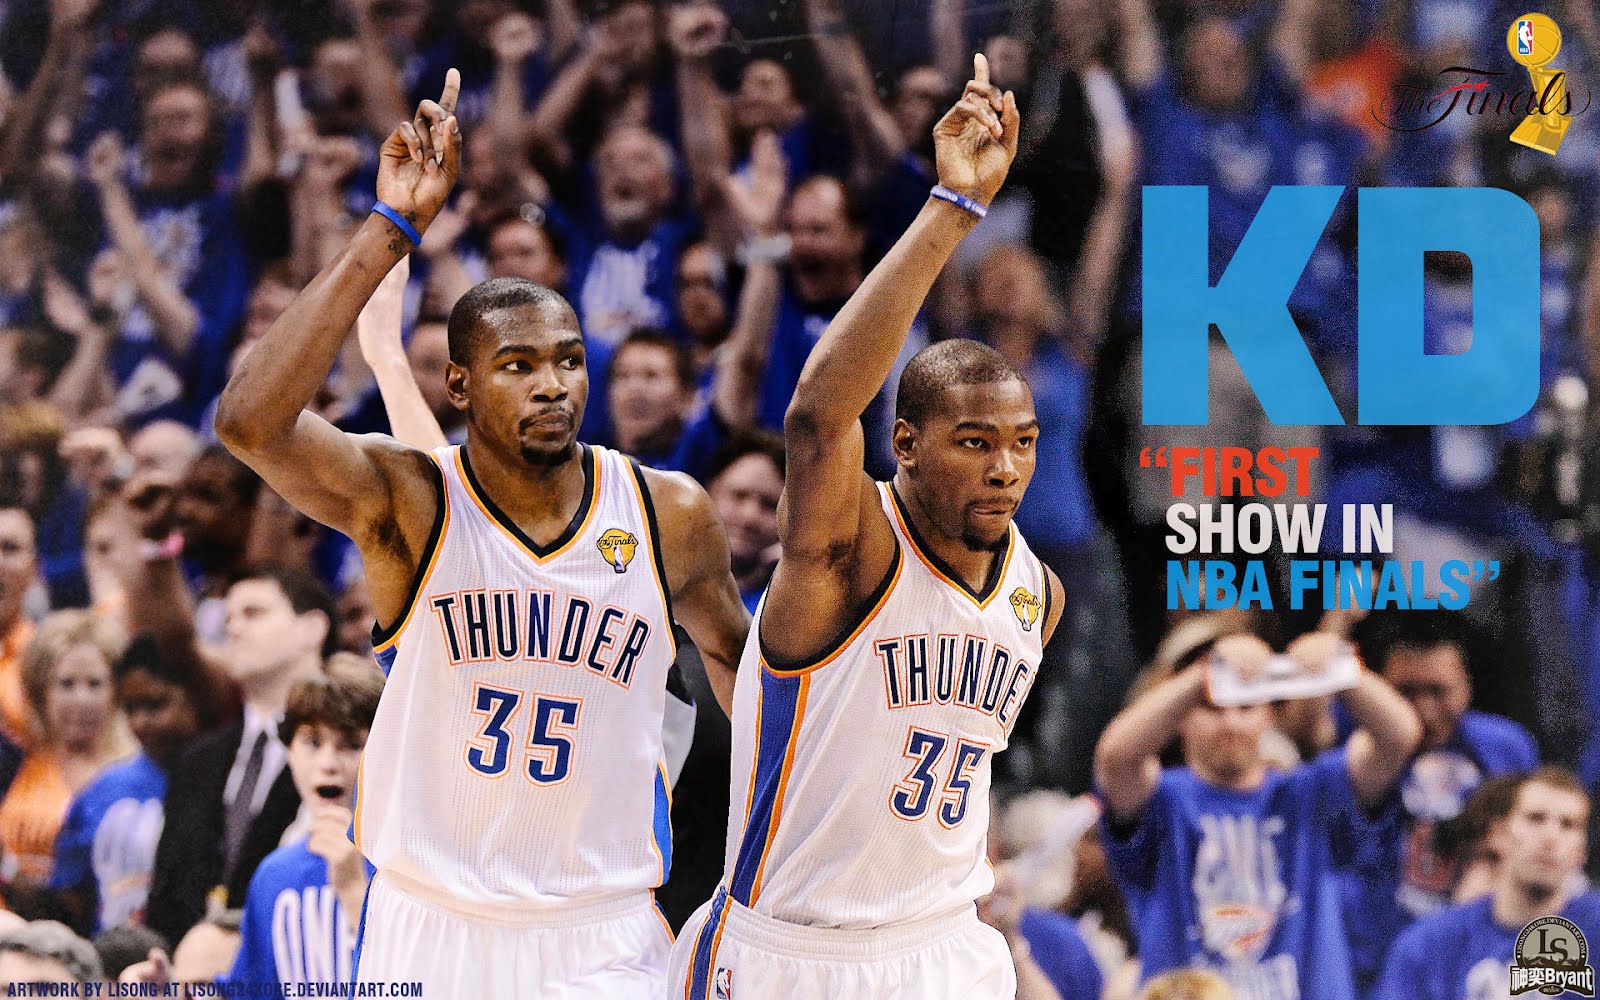 Wallpaper Of Kevin Durant Made For His 1st Career Appearance In Nba